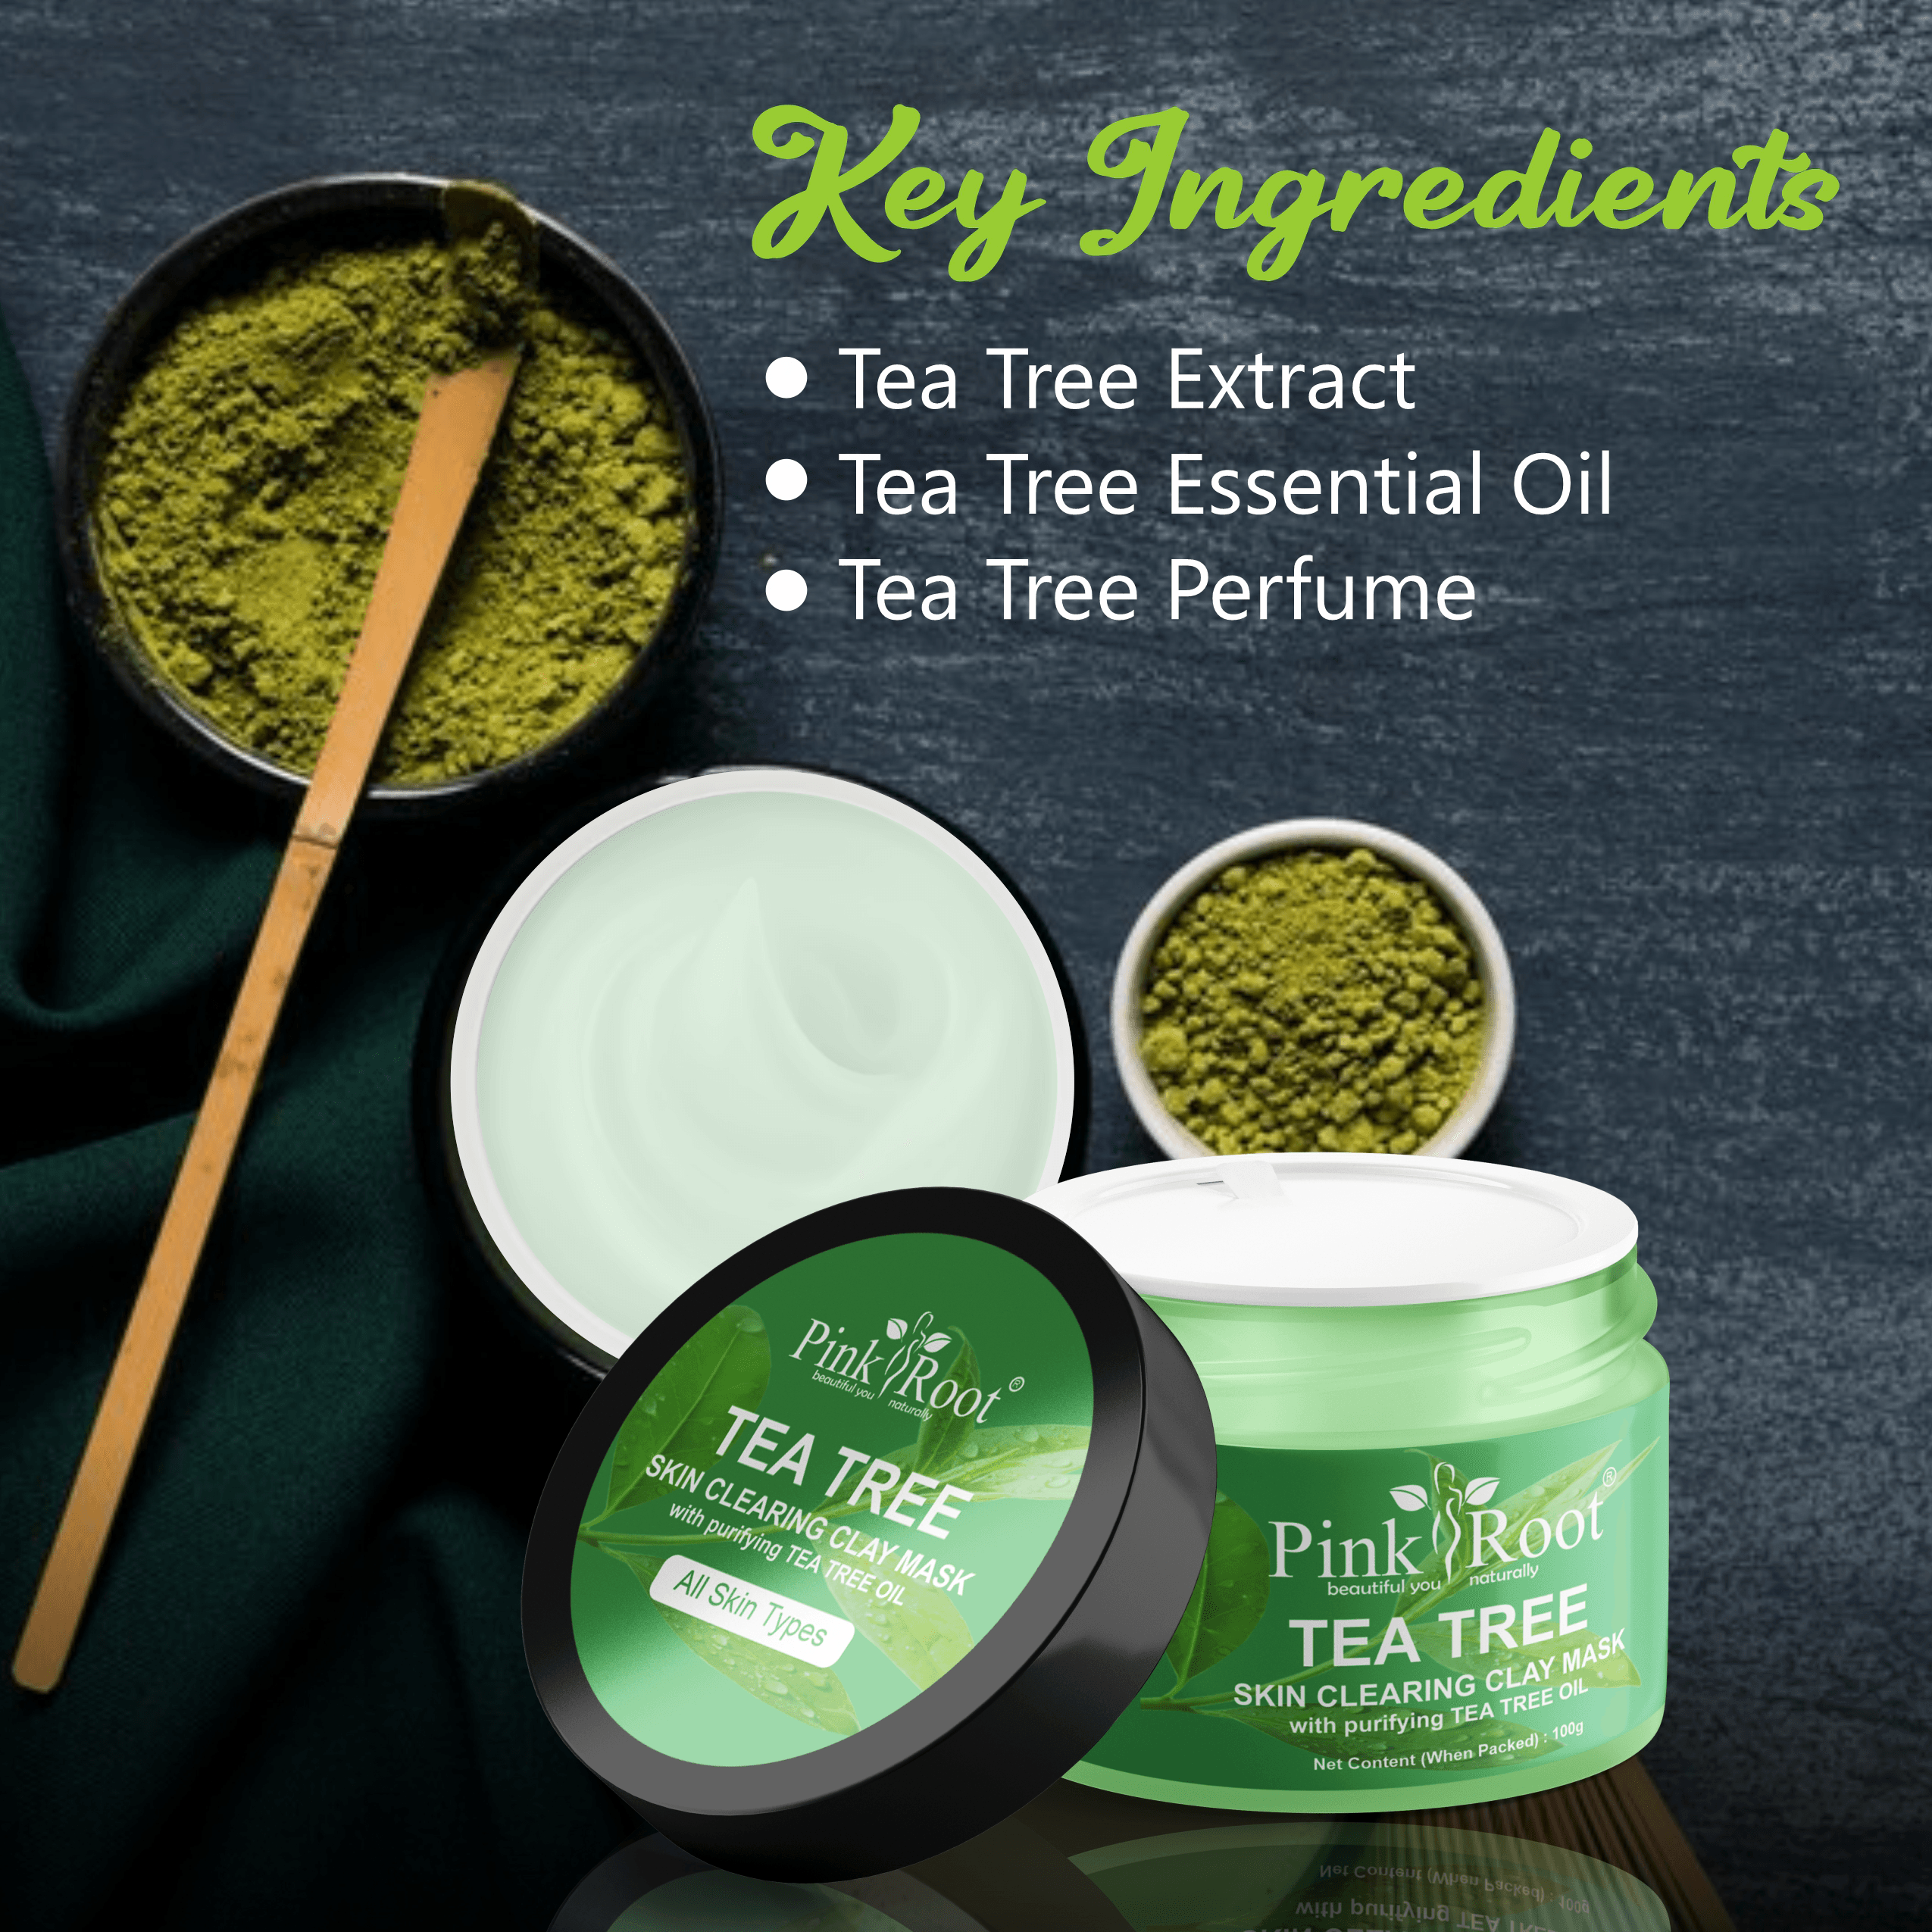 Tea Tree Skin Clearing Clay Mask 100gm - Pink Root